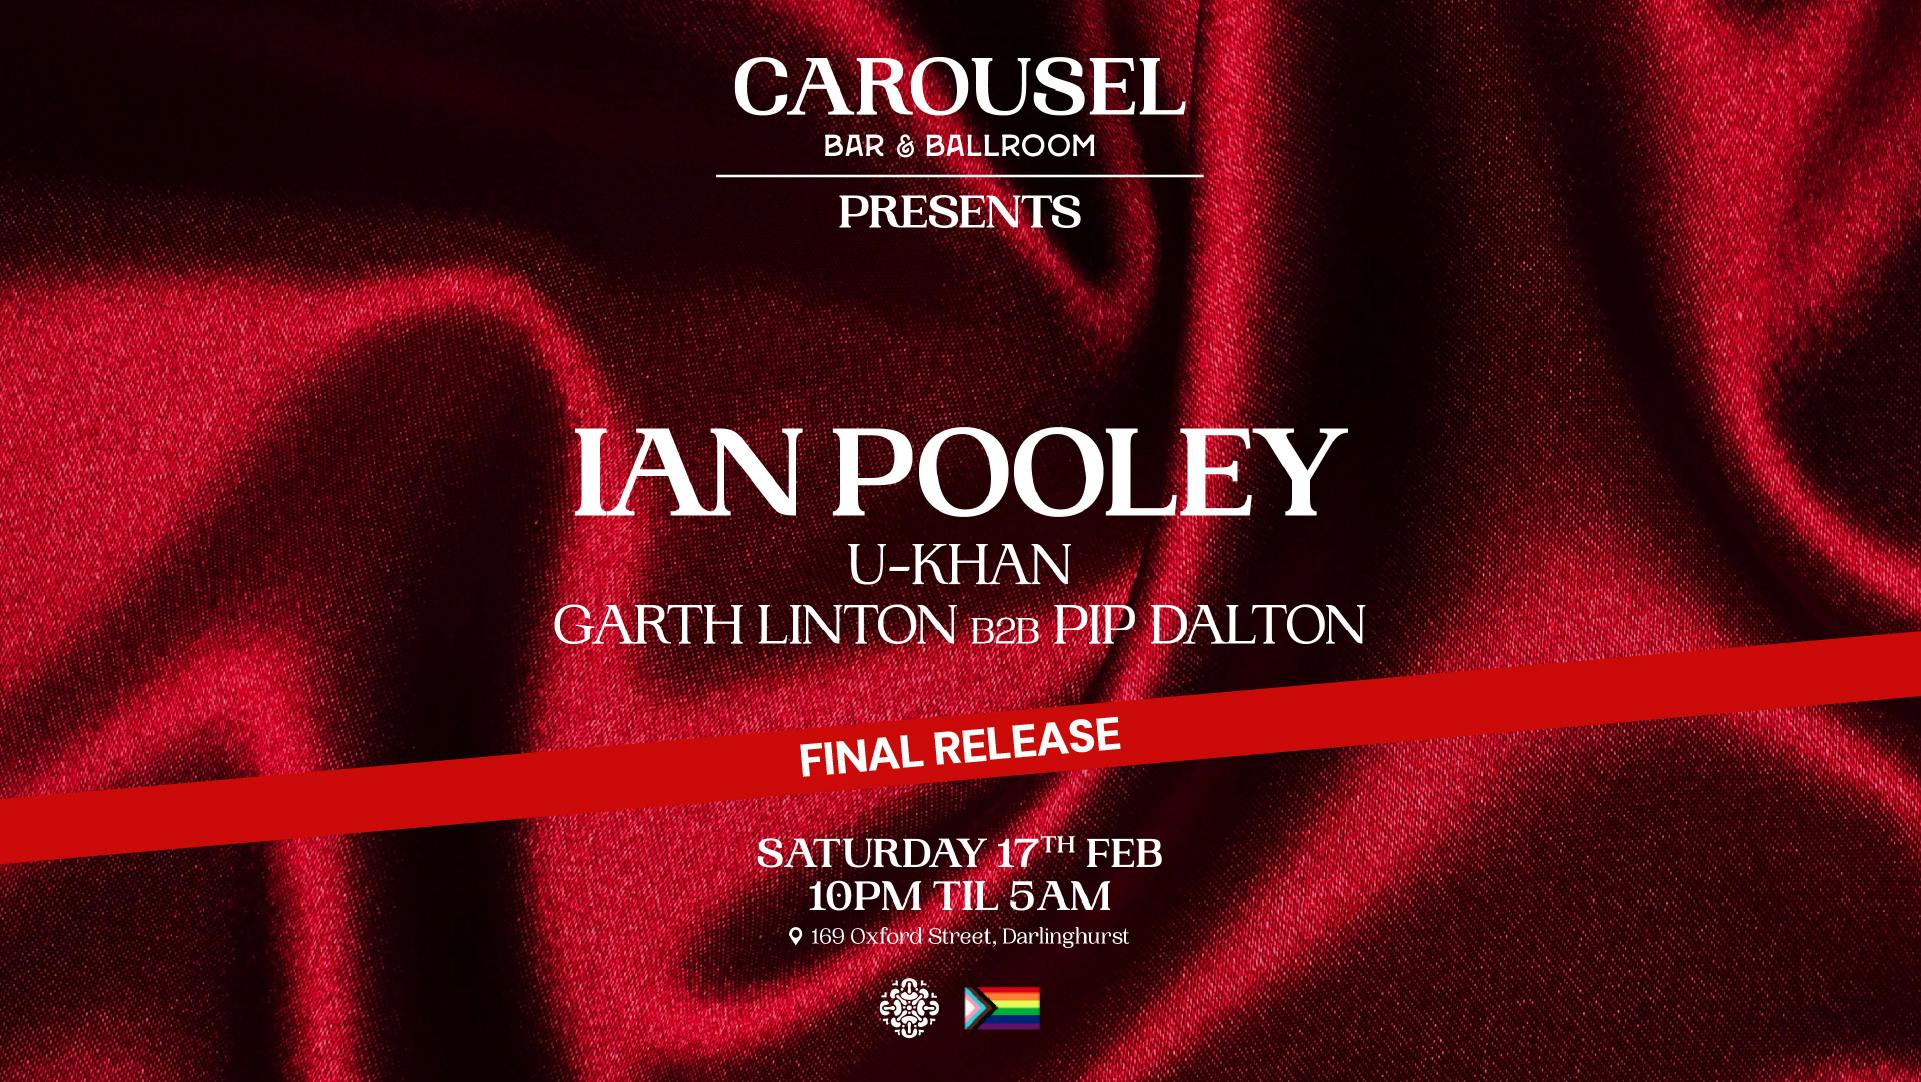 Carousel Presents Ian Pooley - Saturday 17th February FINAL RELEASE